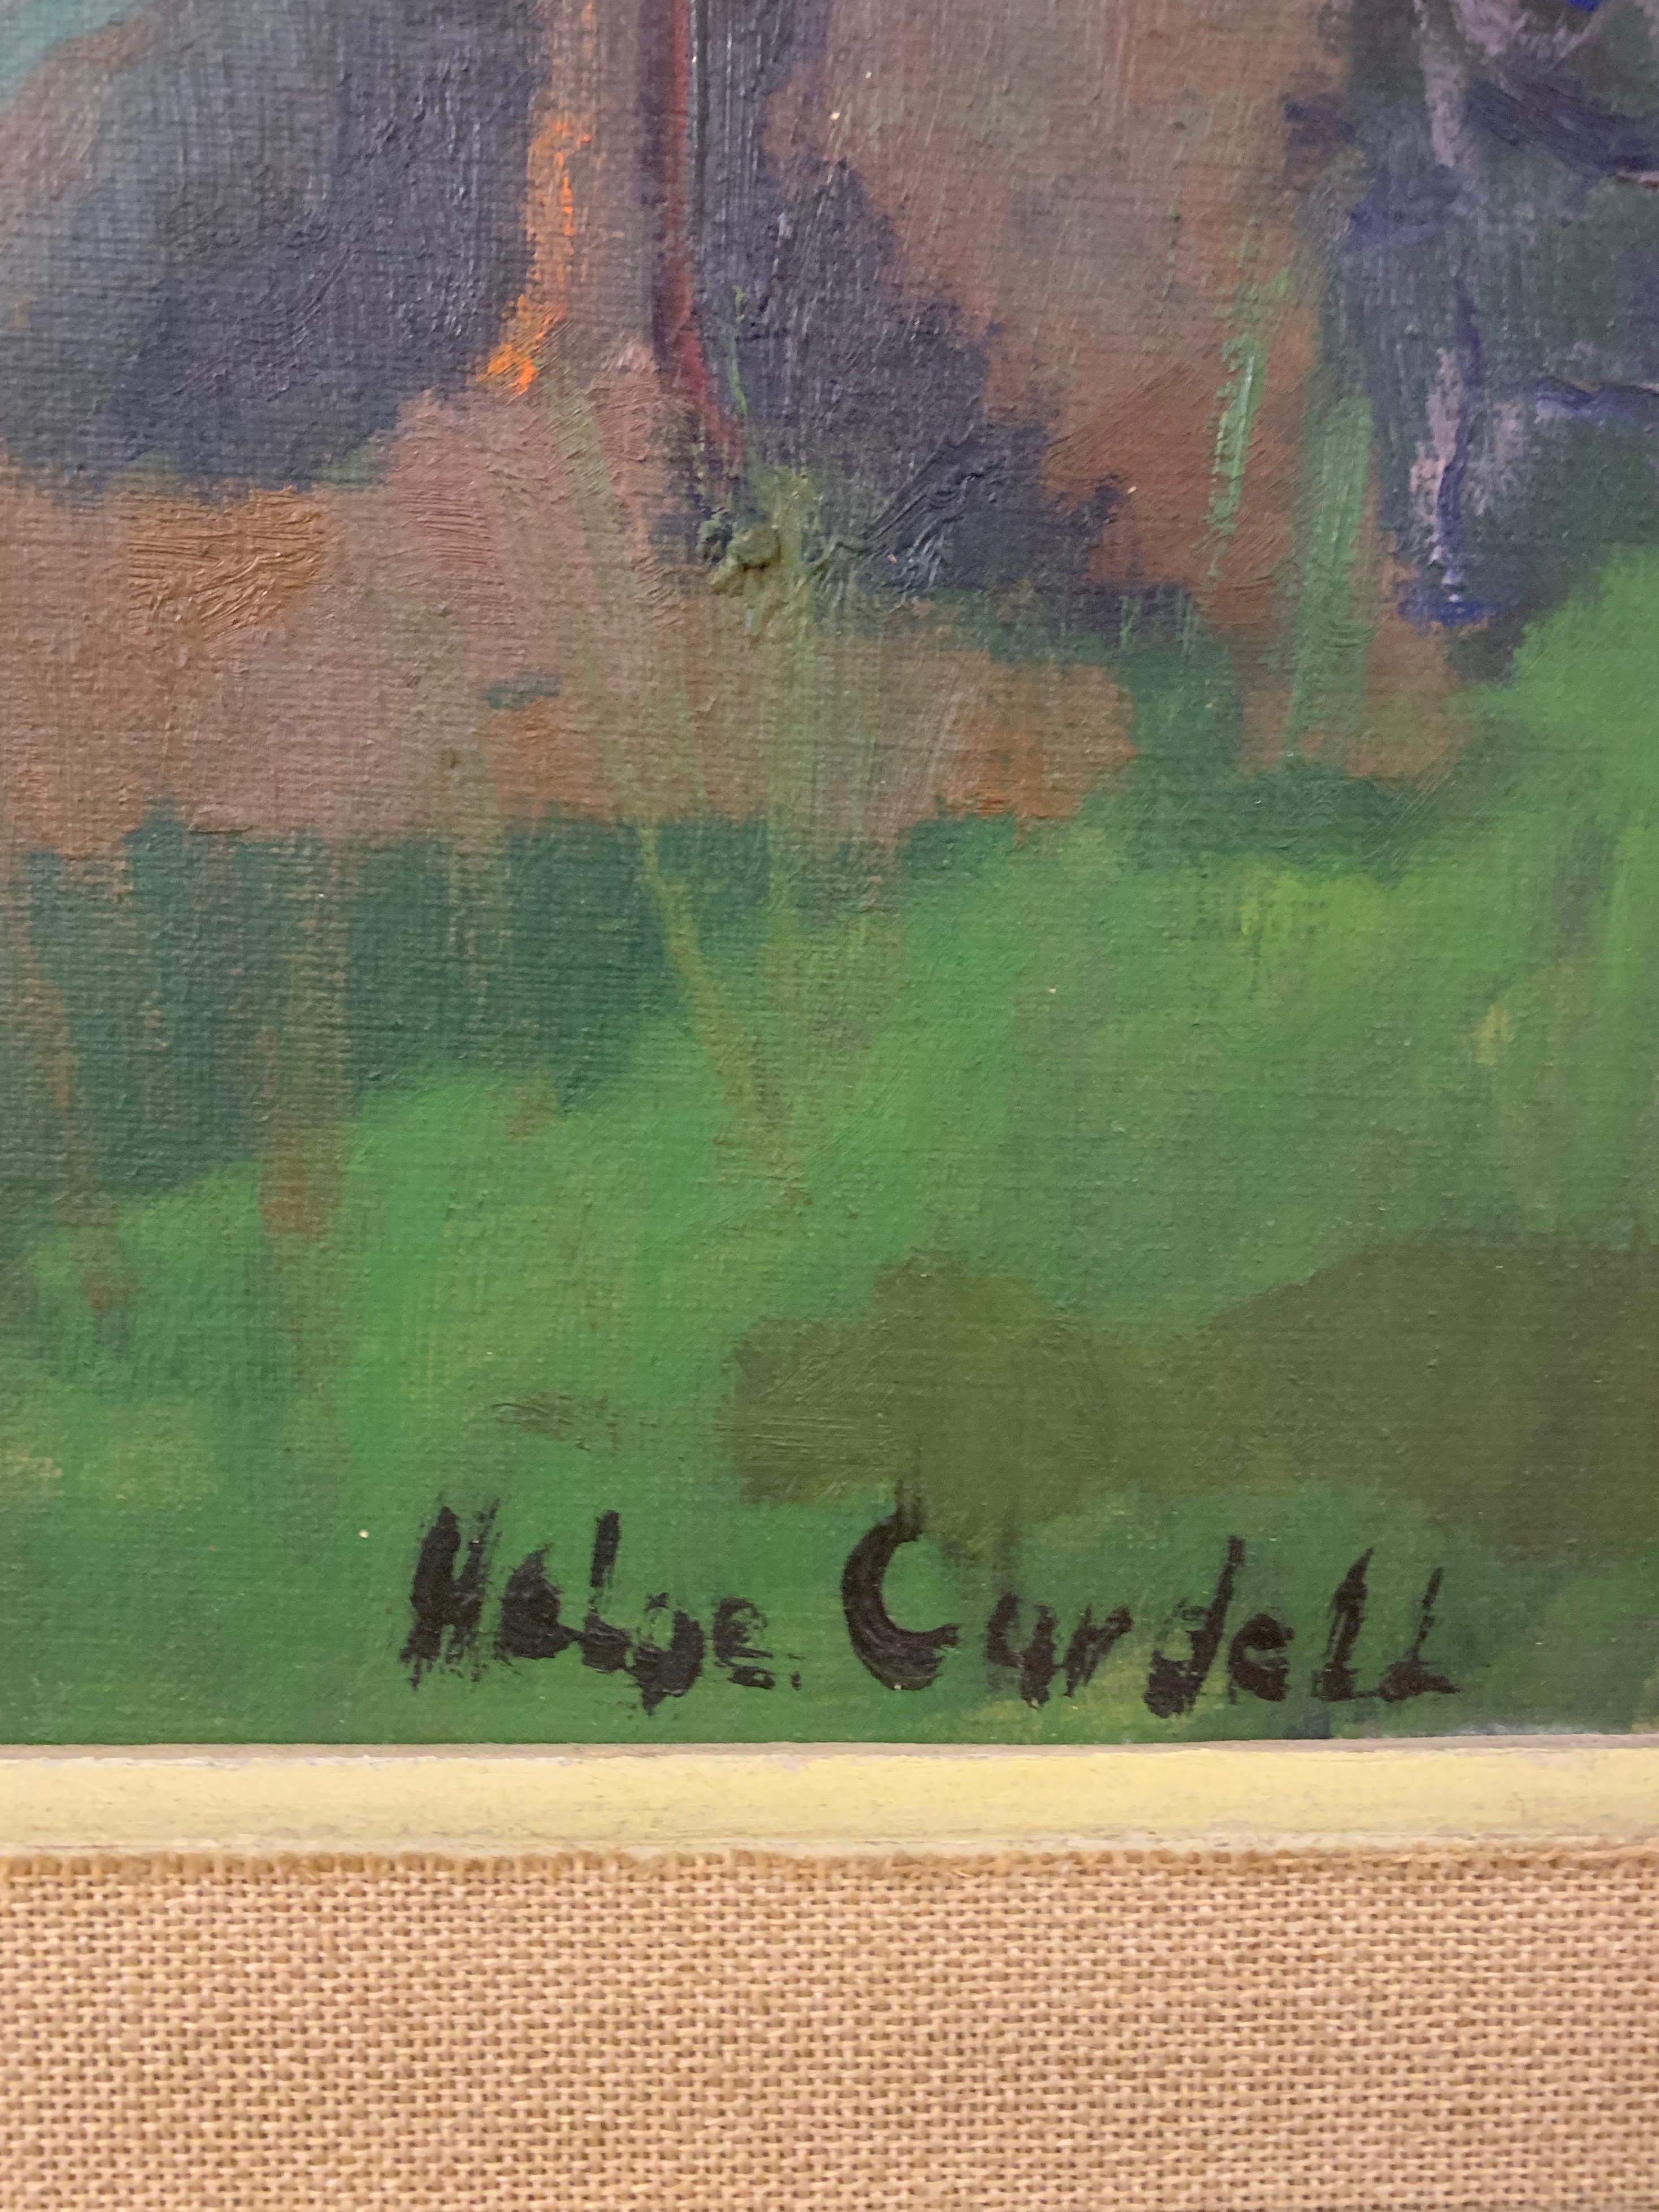 Mid-20th Century Midcentury Swedish Modern Green Forrest Gouache Painting by Helge Cardell